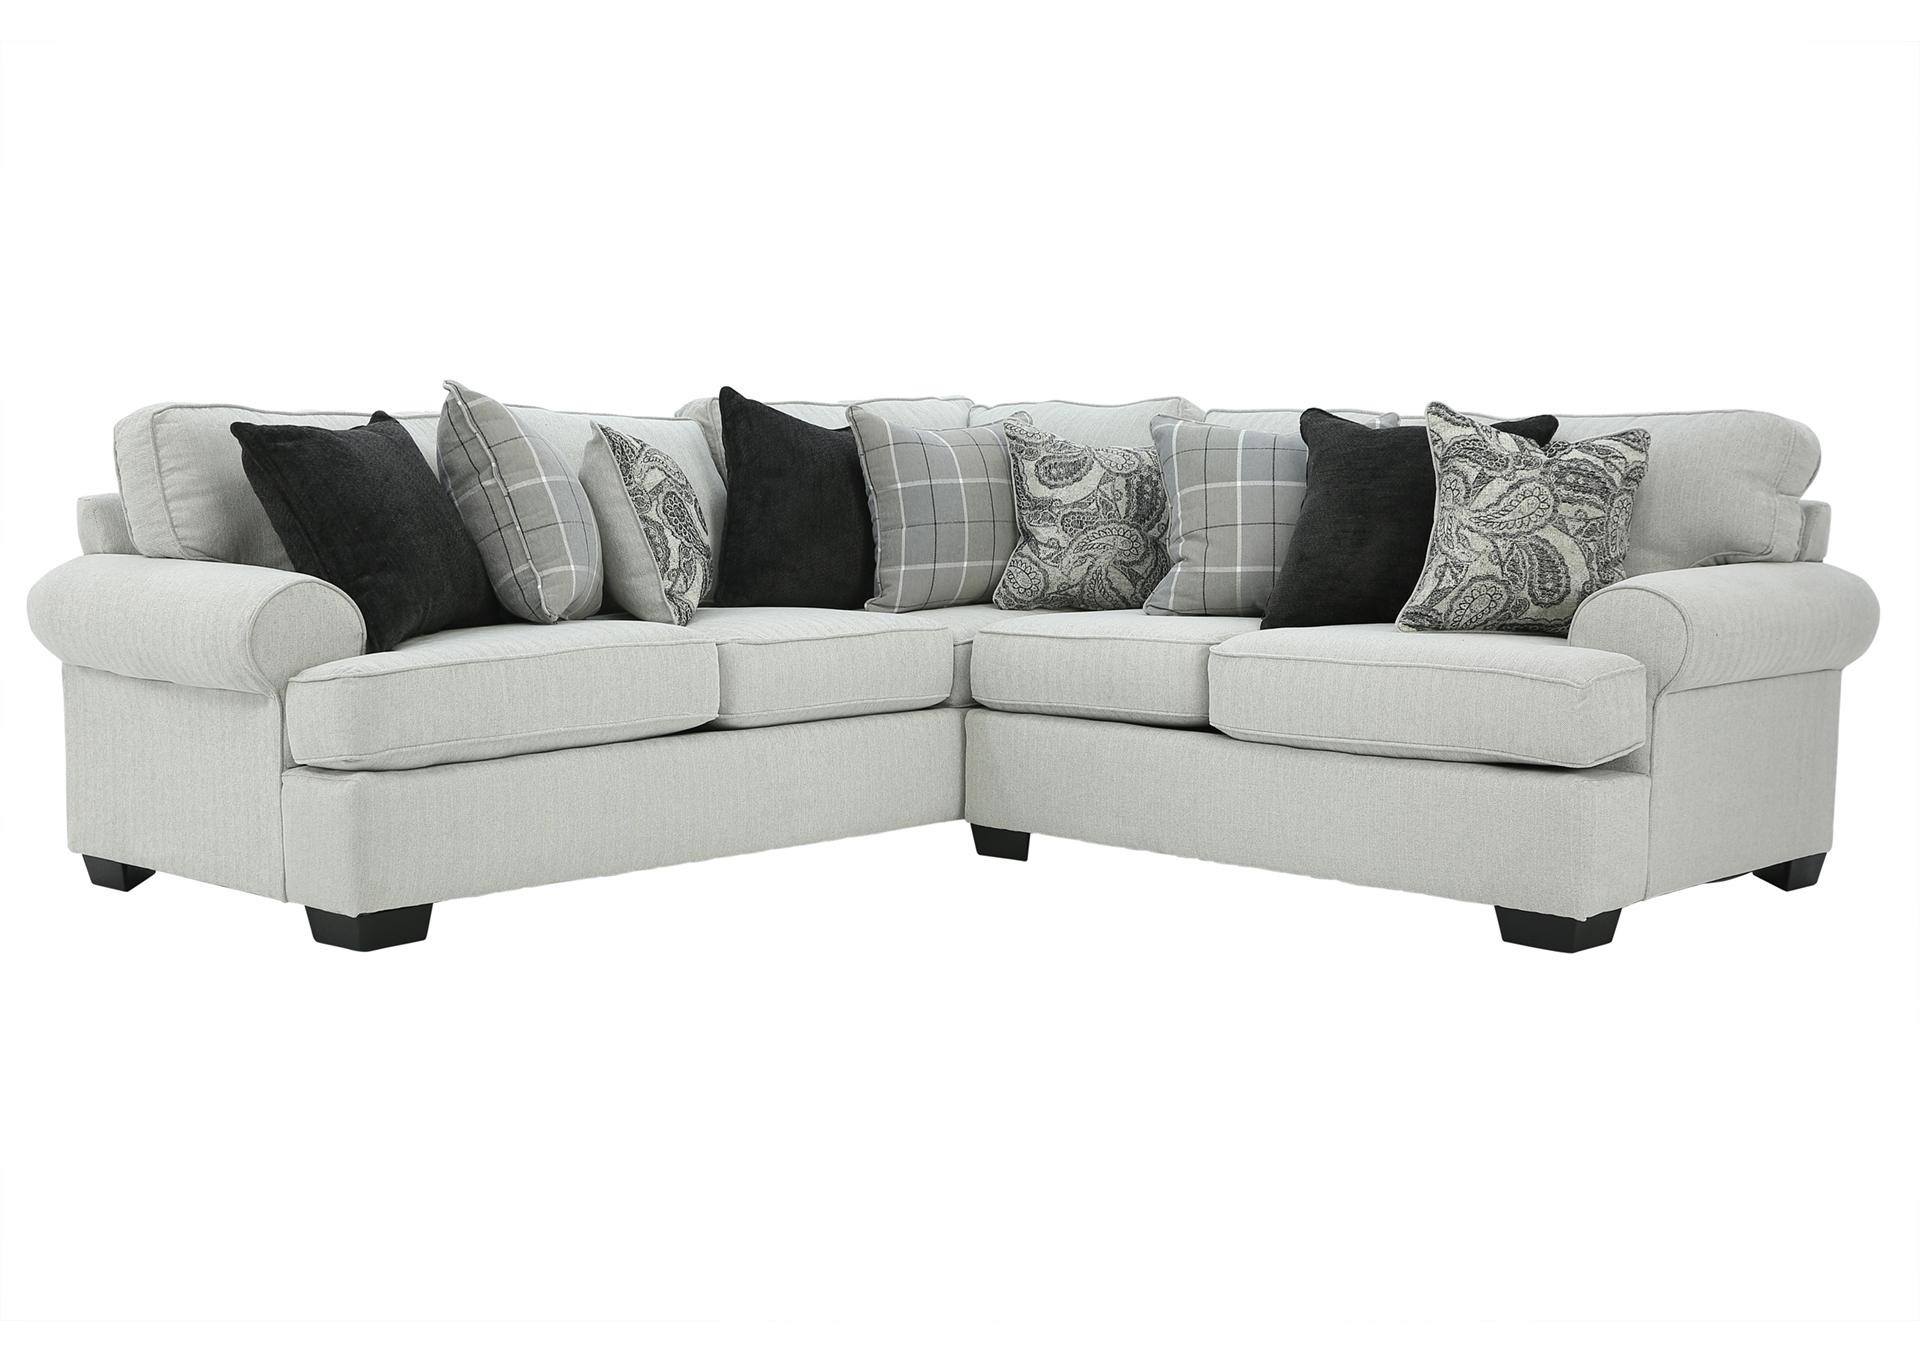 COOPER 2 PIECE SECTIONAL